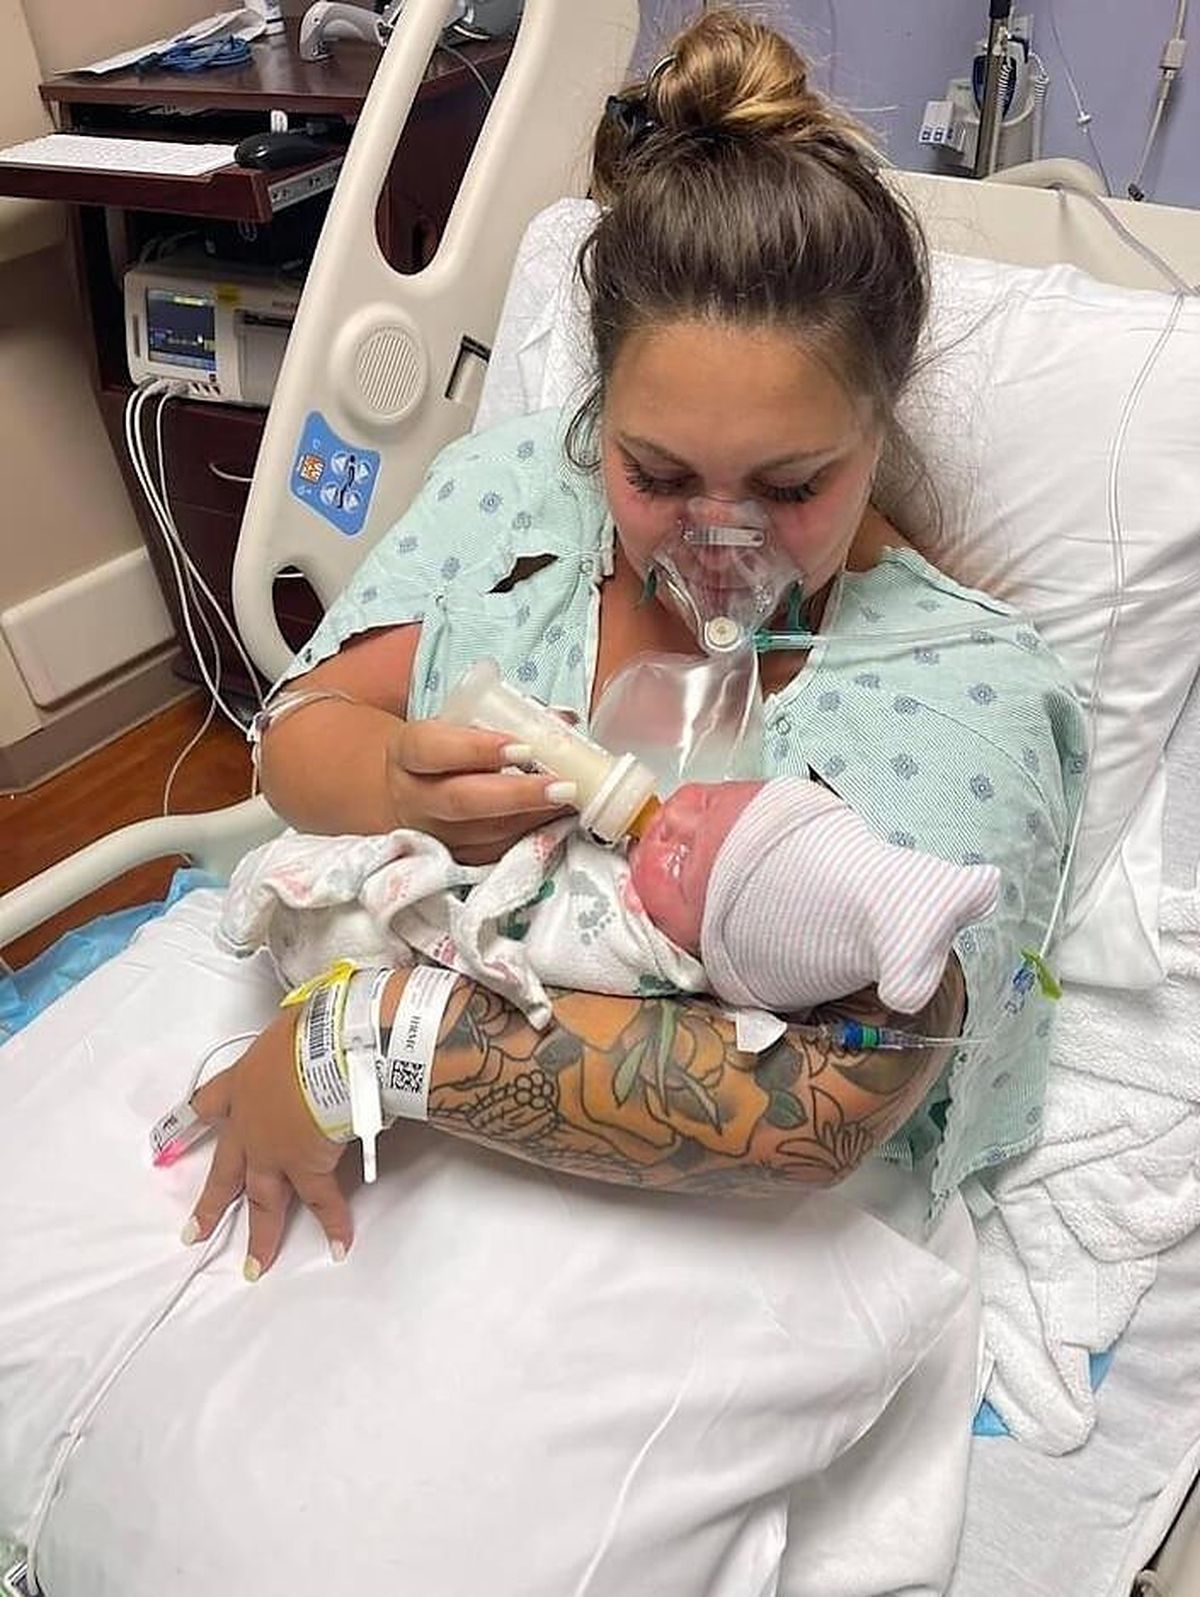 This July 27, 2021, photo provided by Melissa Syverson shows West Melbourne resident Kristen McMullen, 30, feeding her newborn daughter, Summer, at Holmes Regional Medical Center in Melbourne, Fla. Kristen only got to hold Summer for a few moments after giving birth via emergency C-section. The mother, who had COVID-19, was then taken to the ICU, where her condition worsened. She died on Aug. 6, 2021, 10 days after her little girl was born.  (Melissa Syverson)